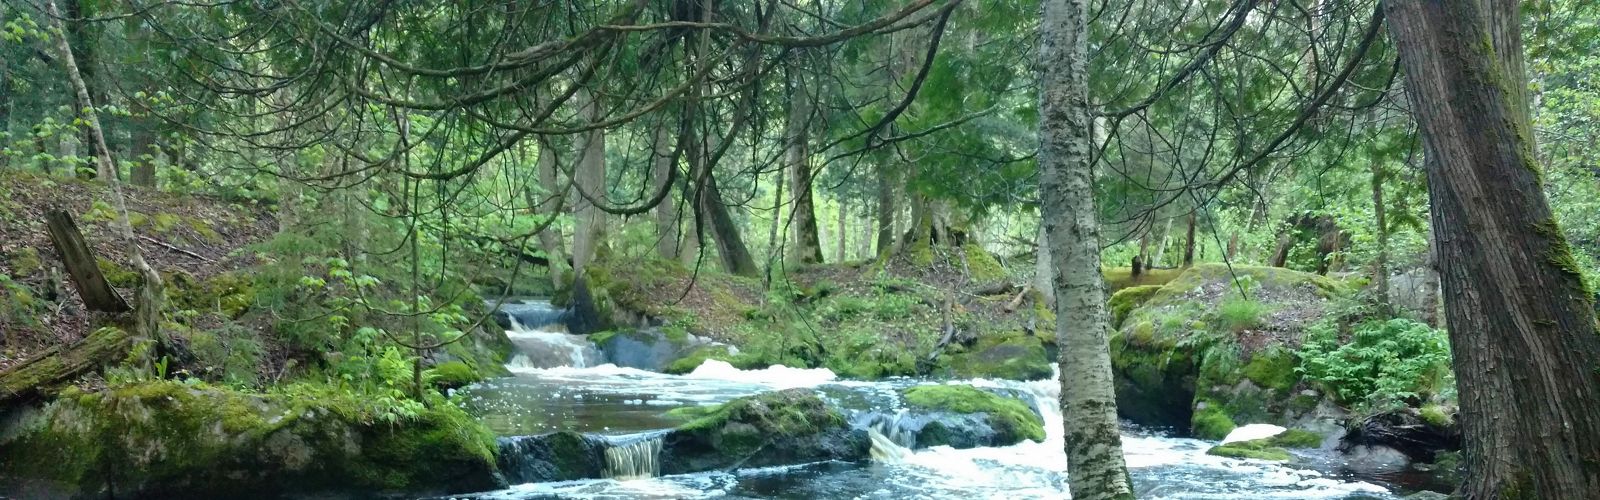 A creek with moss and trees surrounding the water